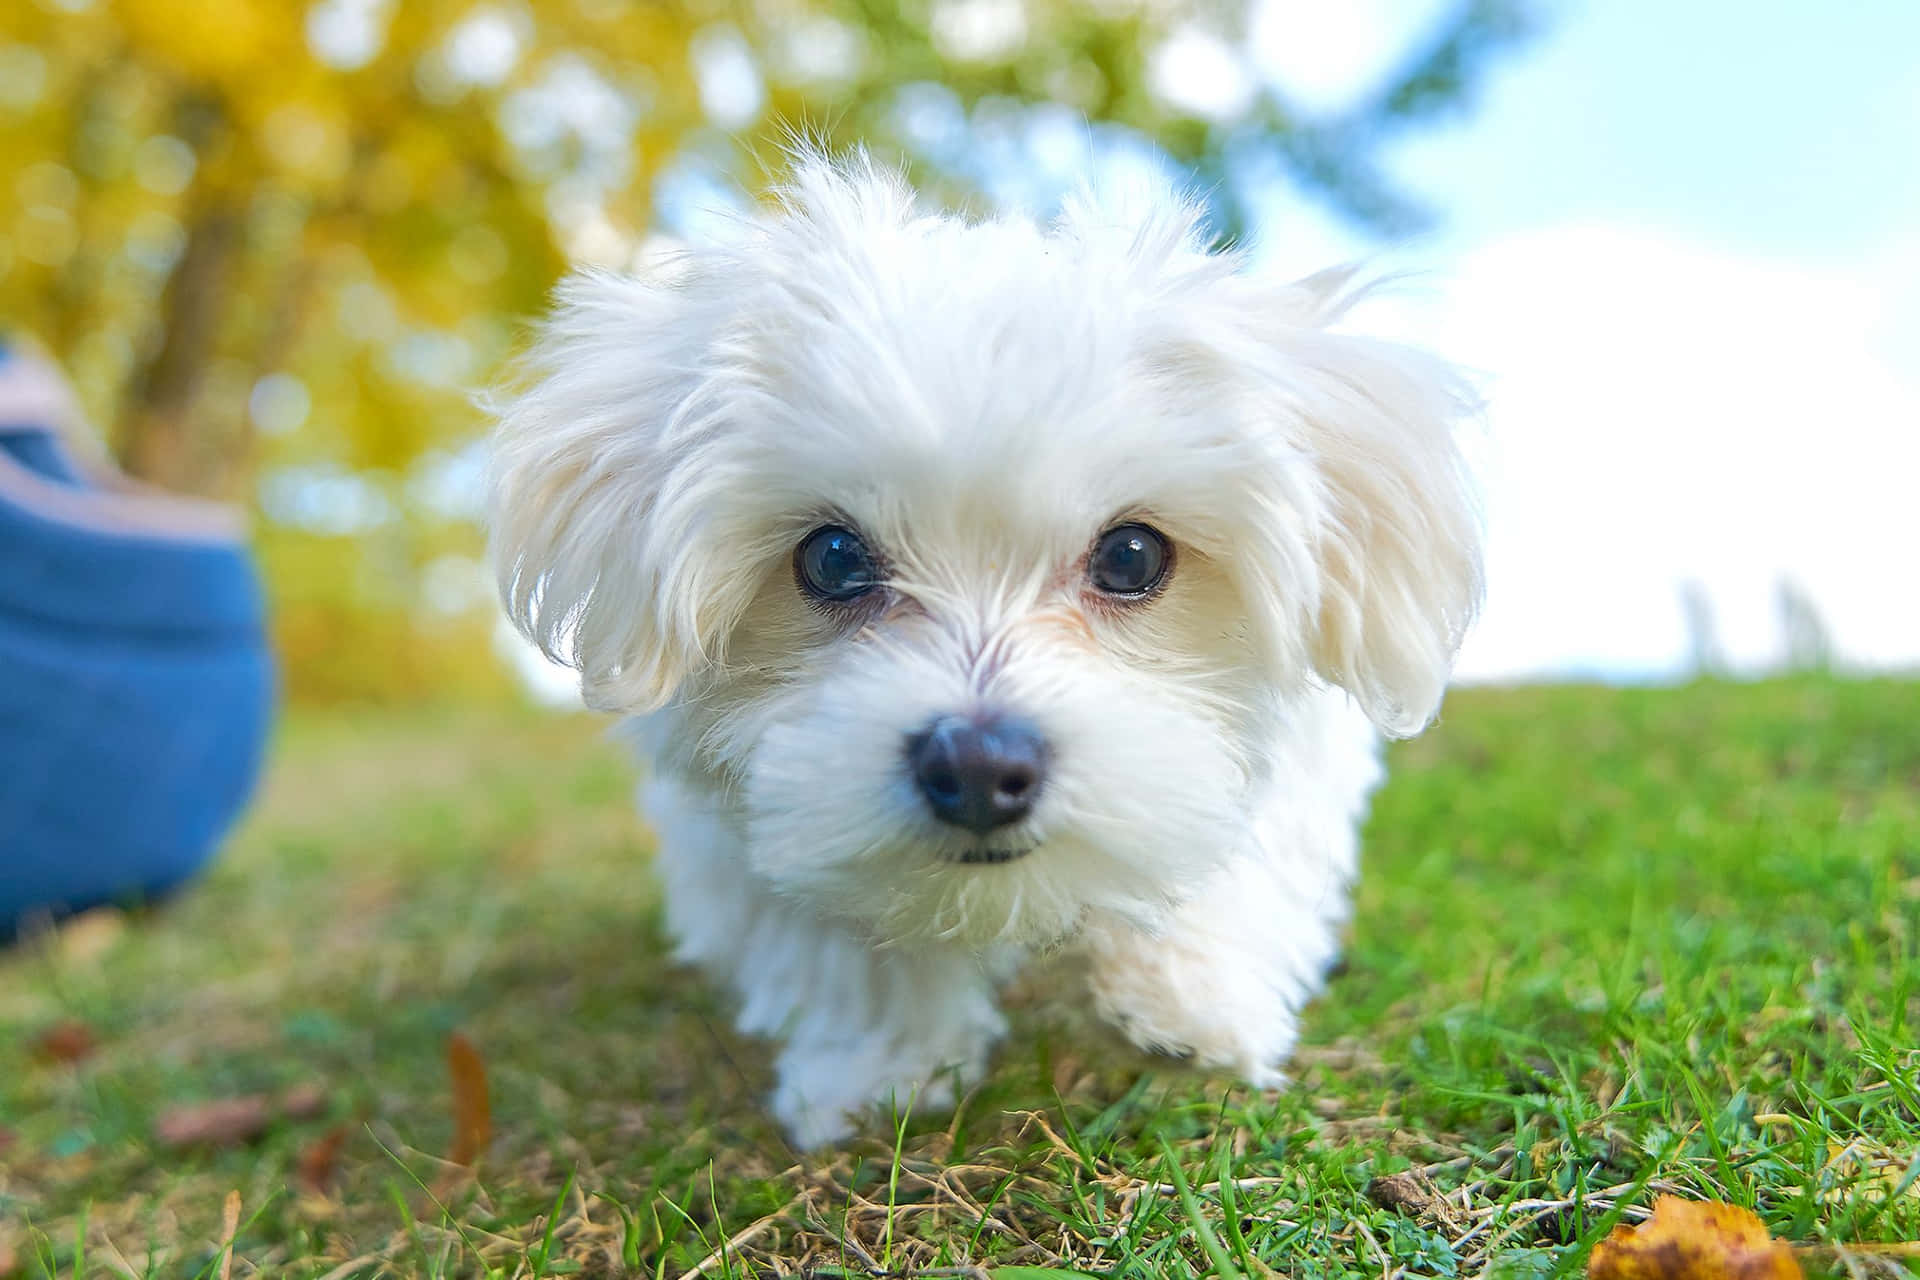 A Small White Dog Walking On The Grass